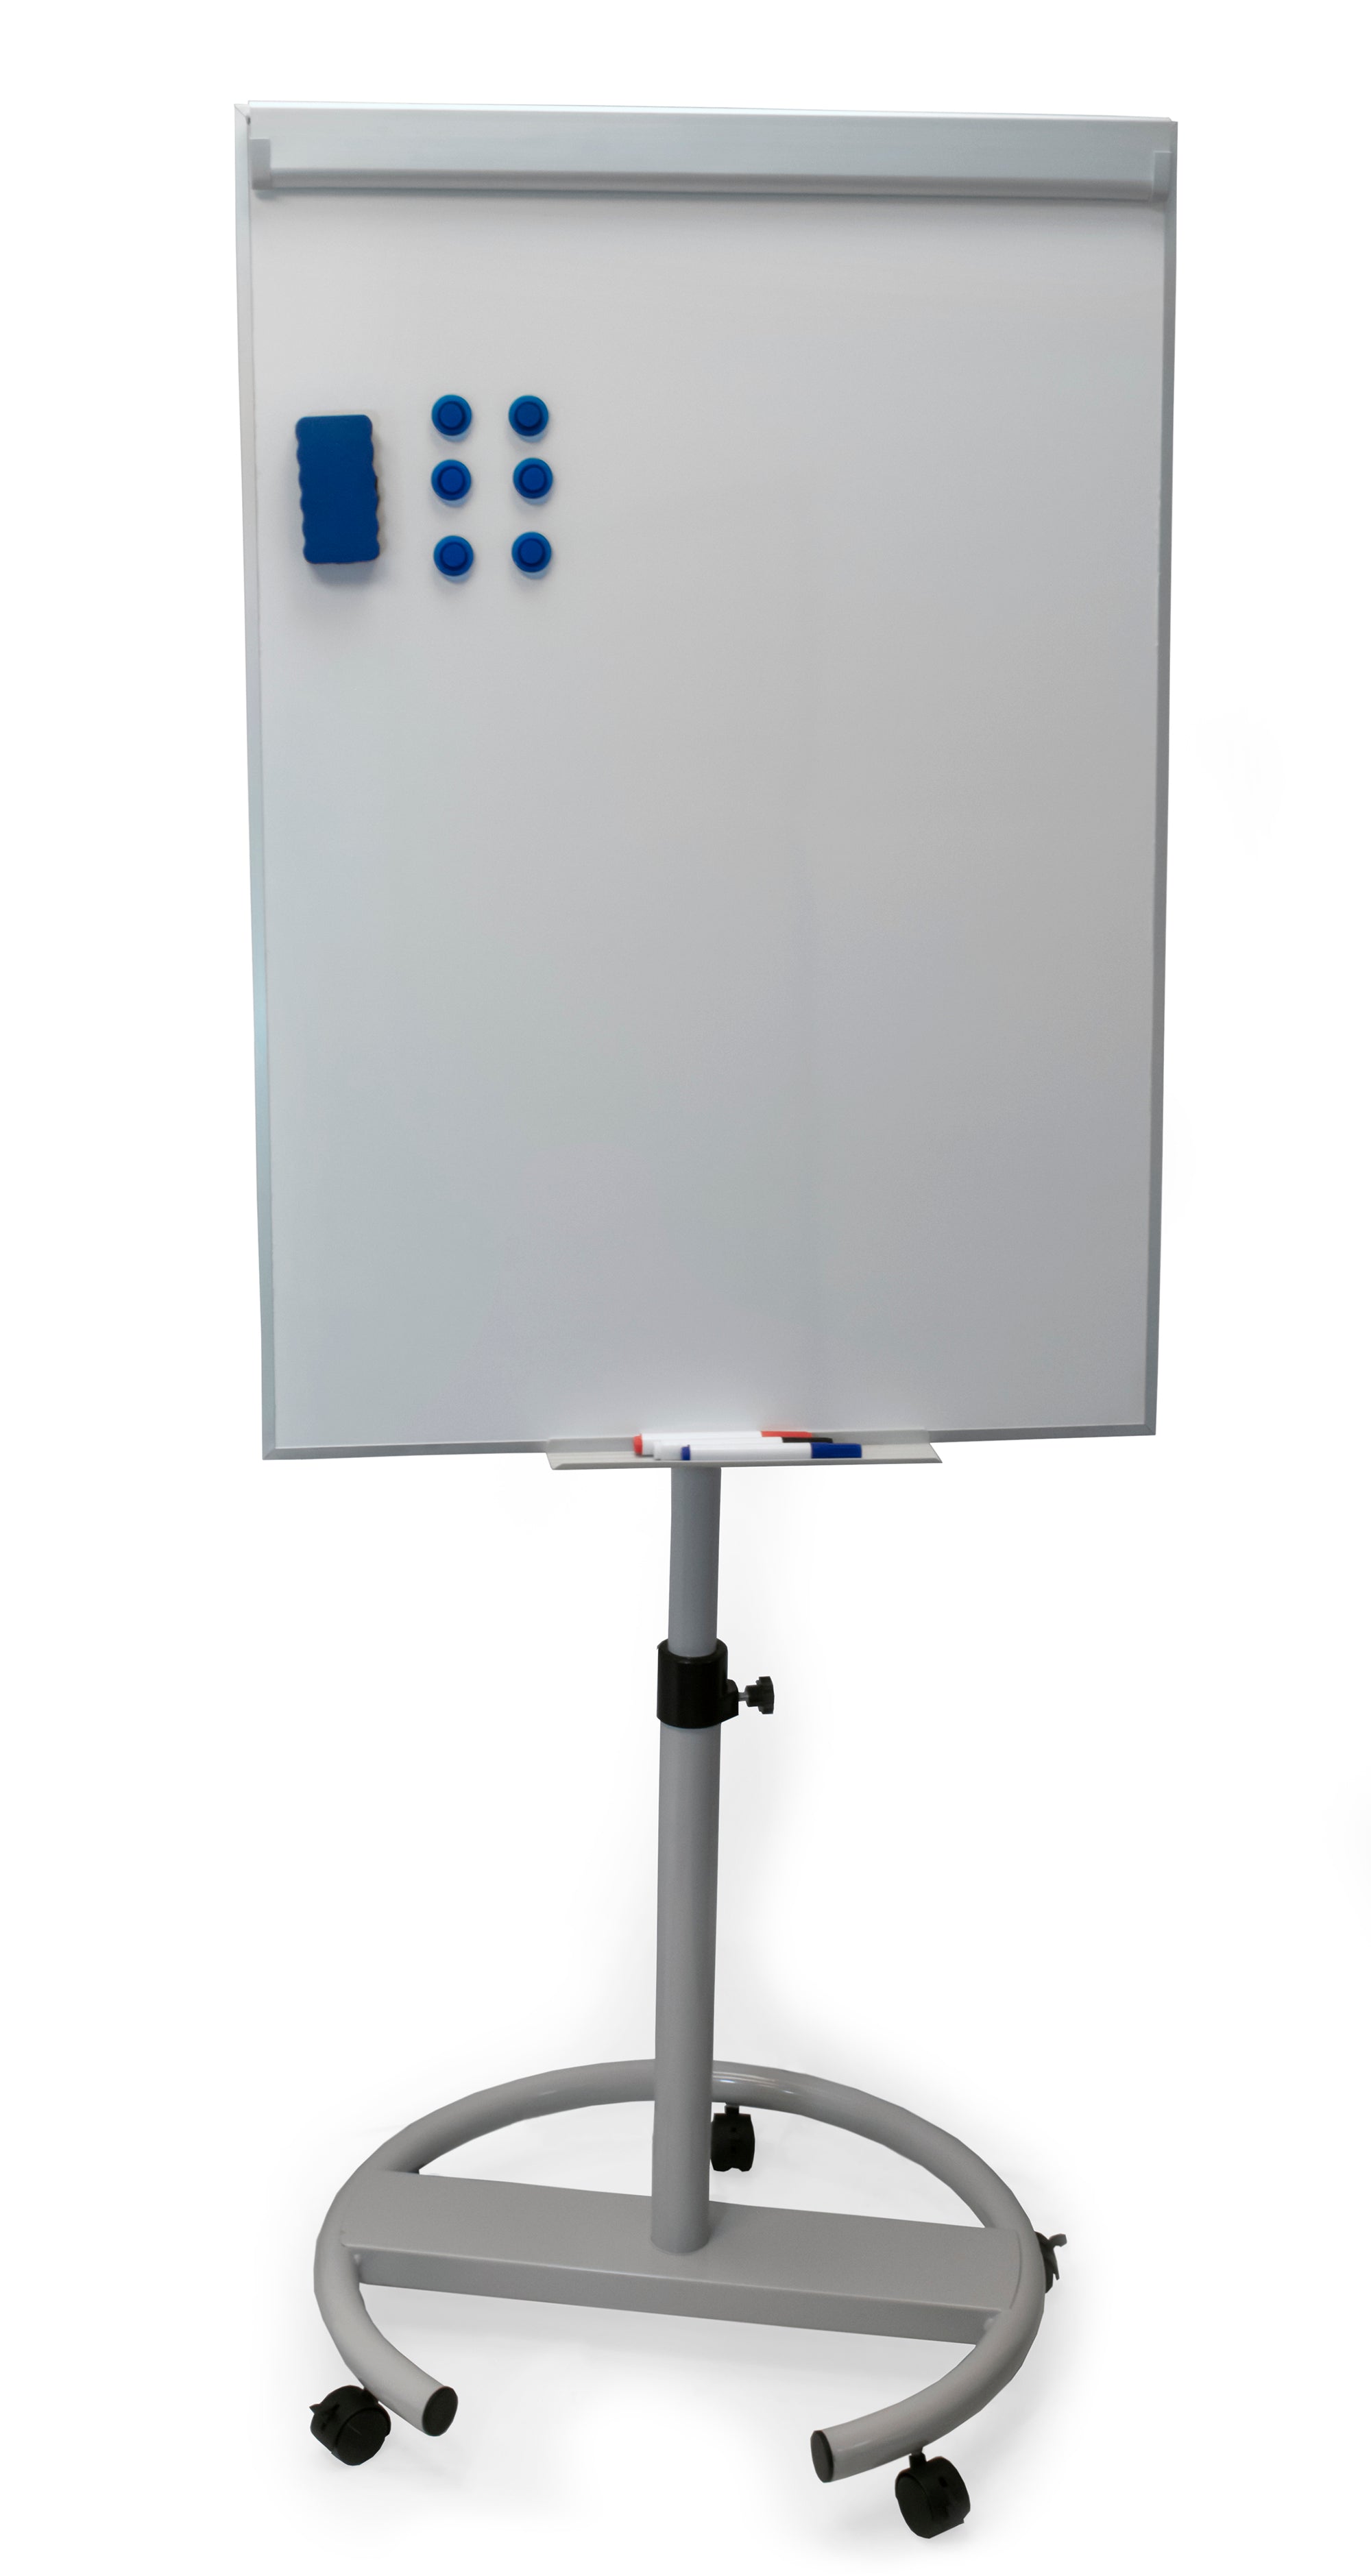 Lifekrafts Dry Erase Easel Board with Stand and Flipchart Holder